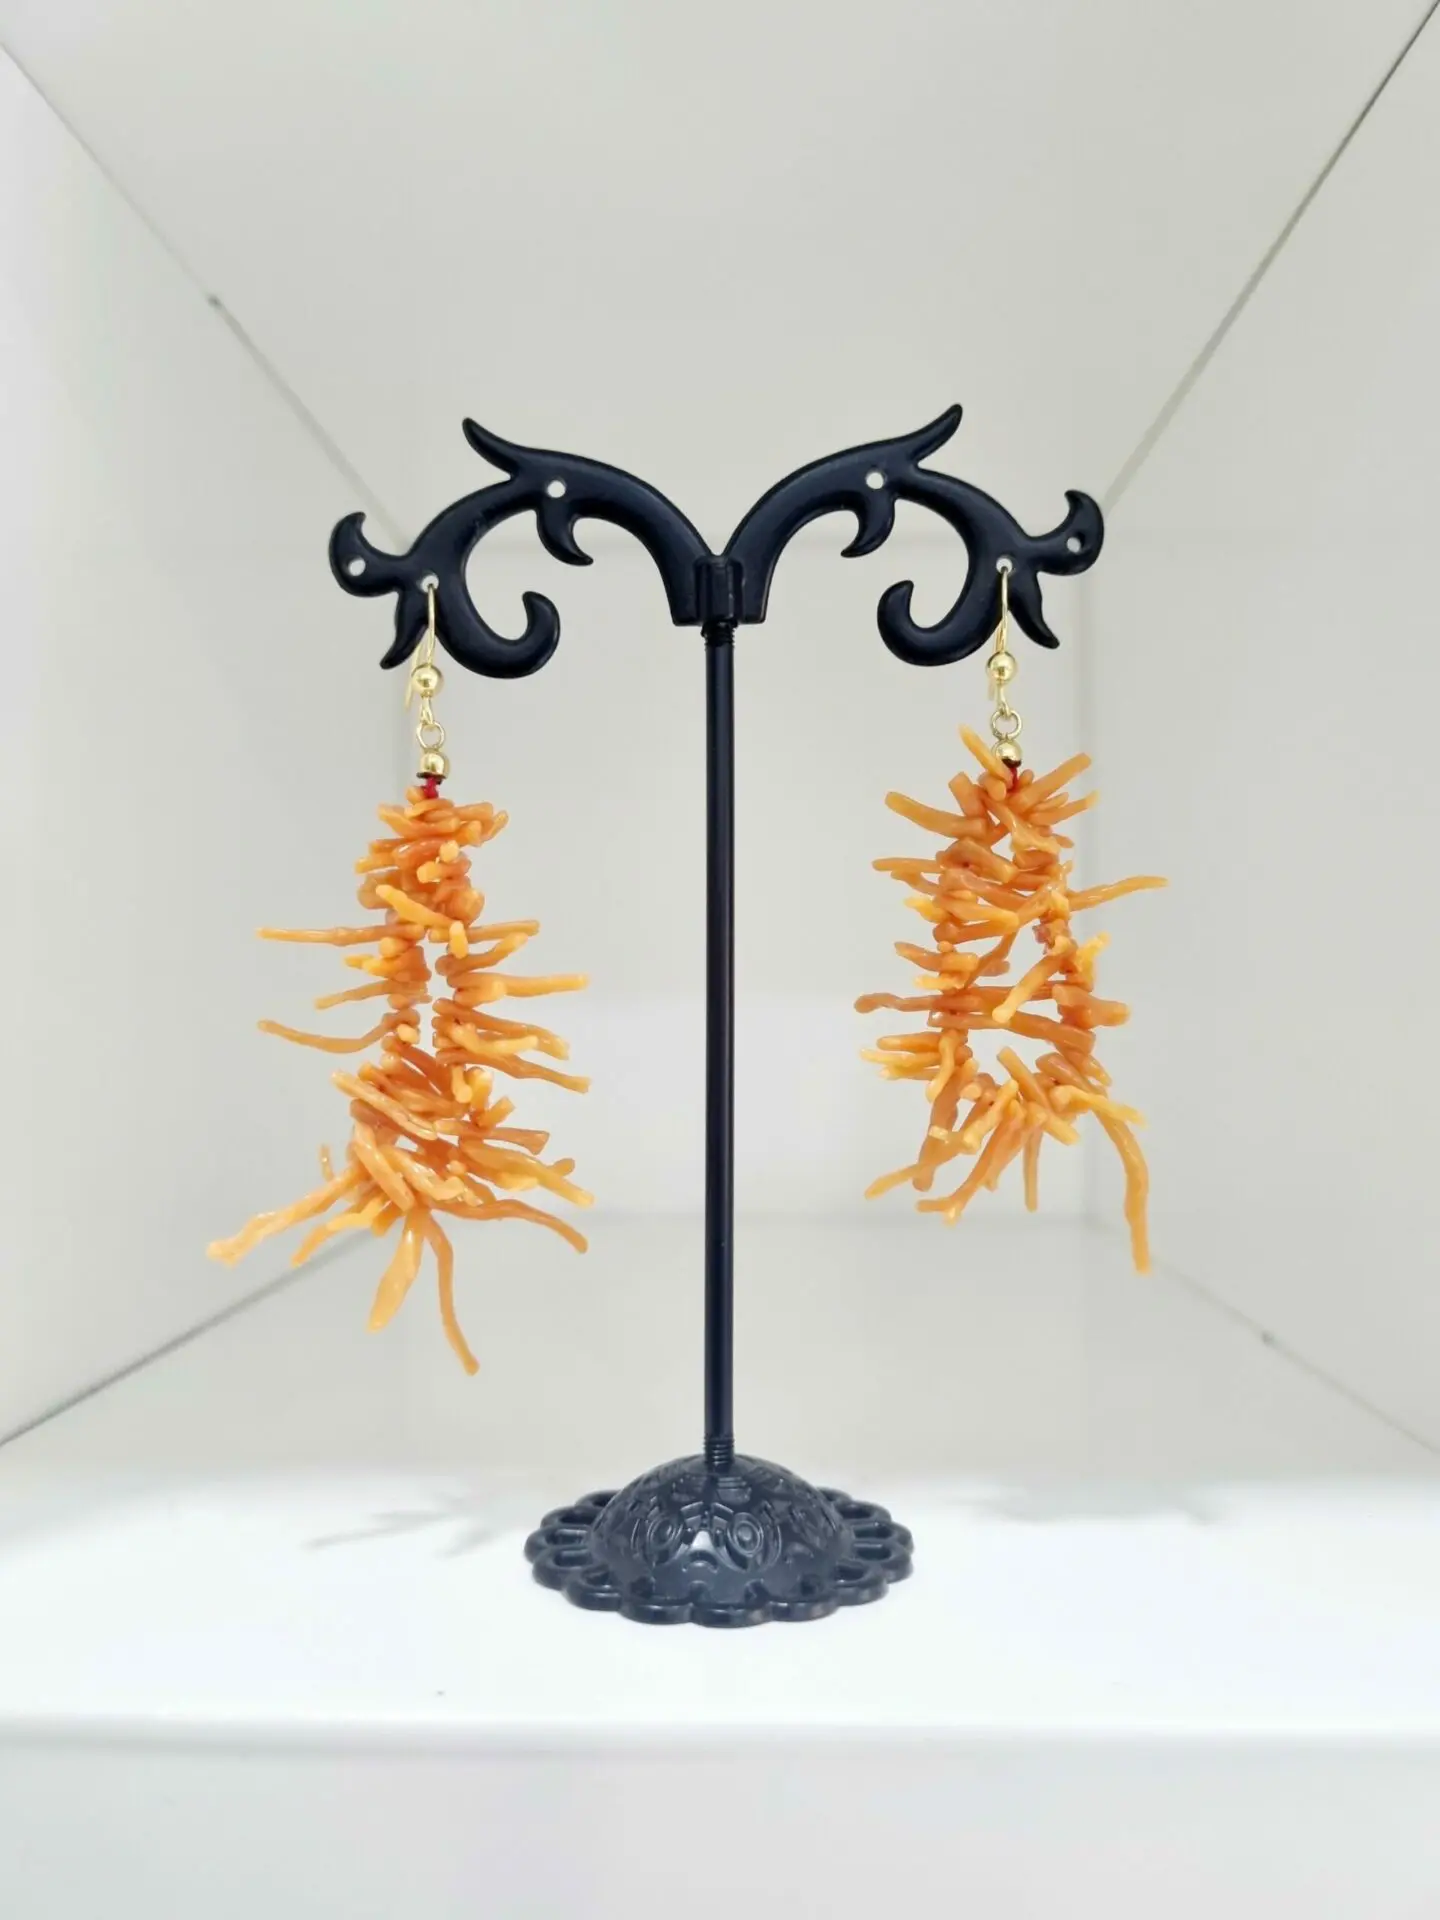 Earrings made with sprigs of orange Mediterranean coral and gold-plated 925 silver hook. Length 6cm Weight 7.8g pair